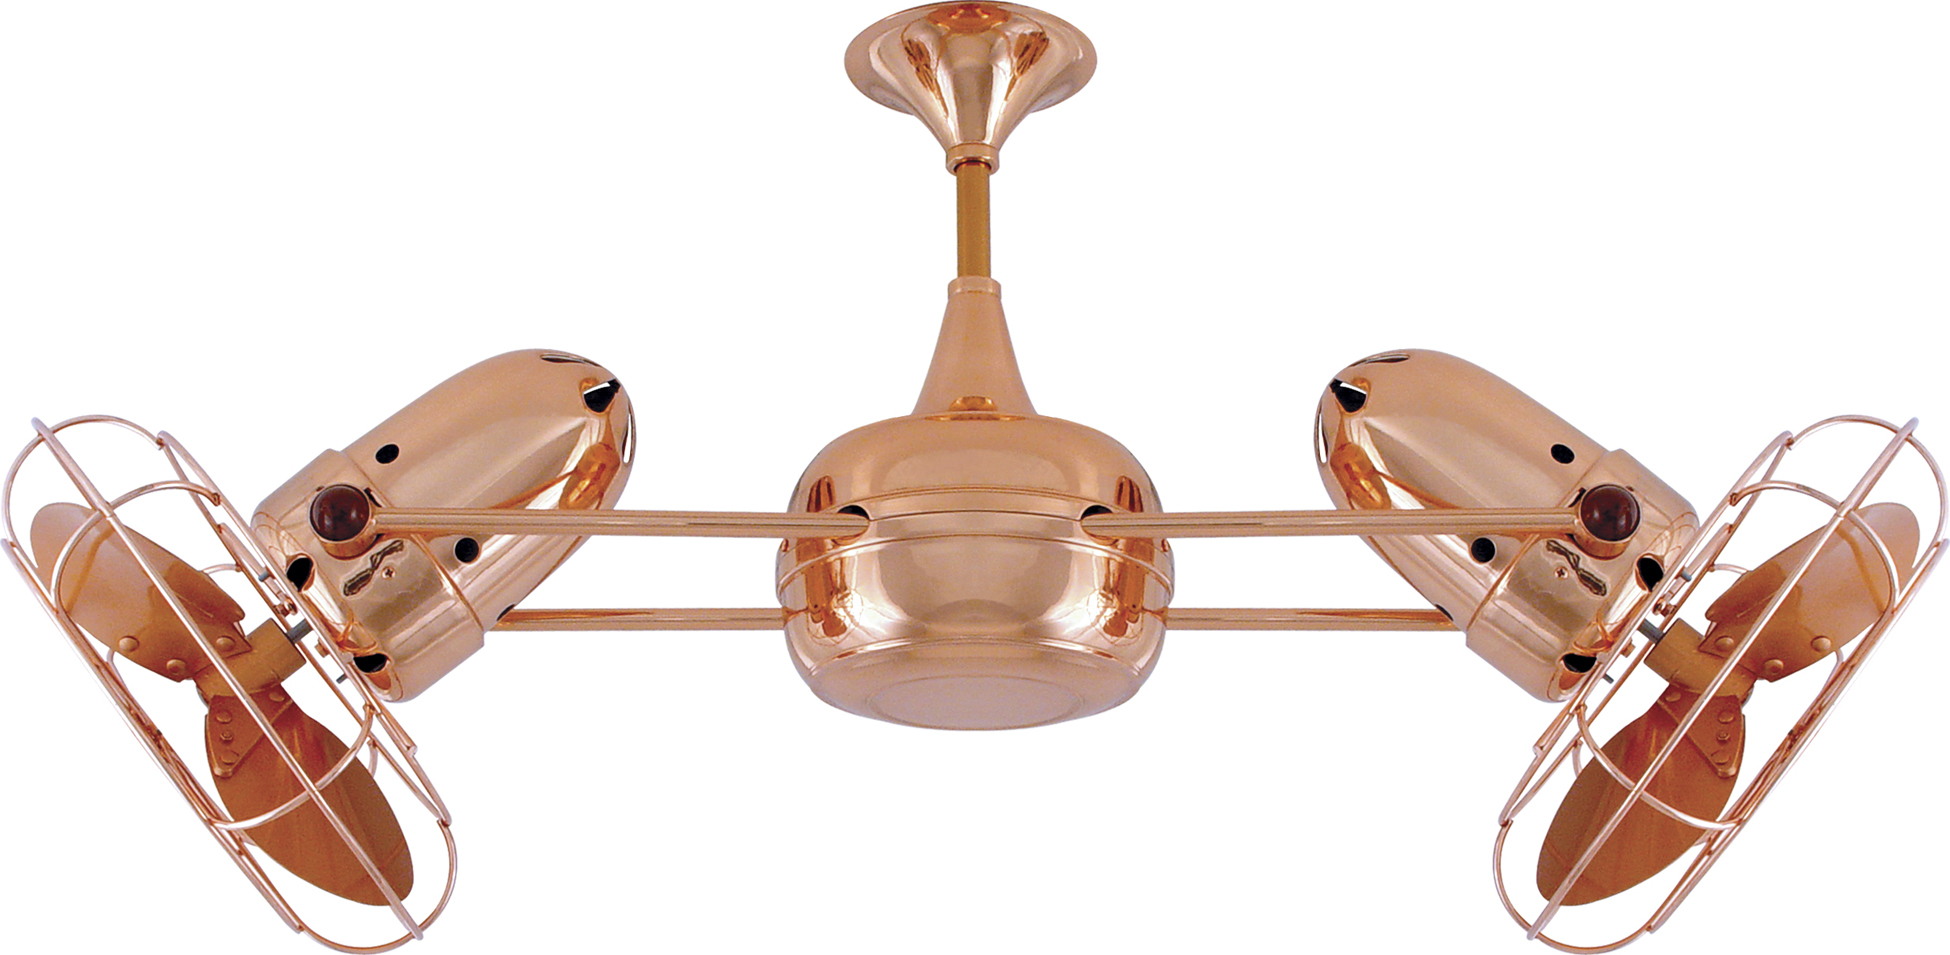 Duplo Dinamico rotational dual head ceiling fan in Polished Copper finish with Metal blades made by Matthews Fan Company.